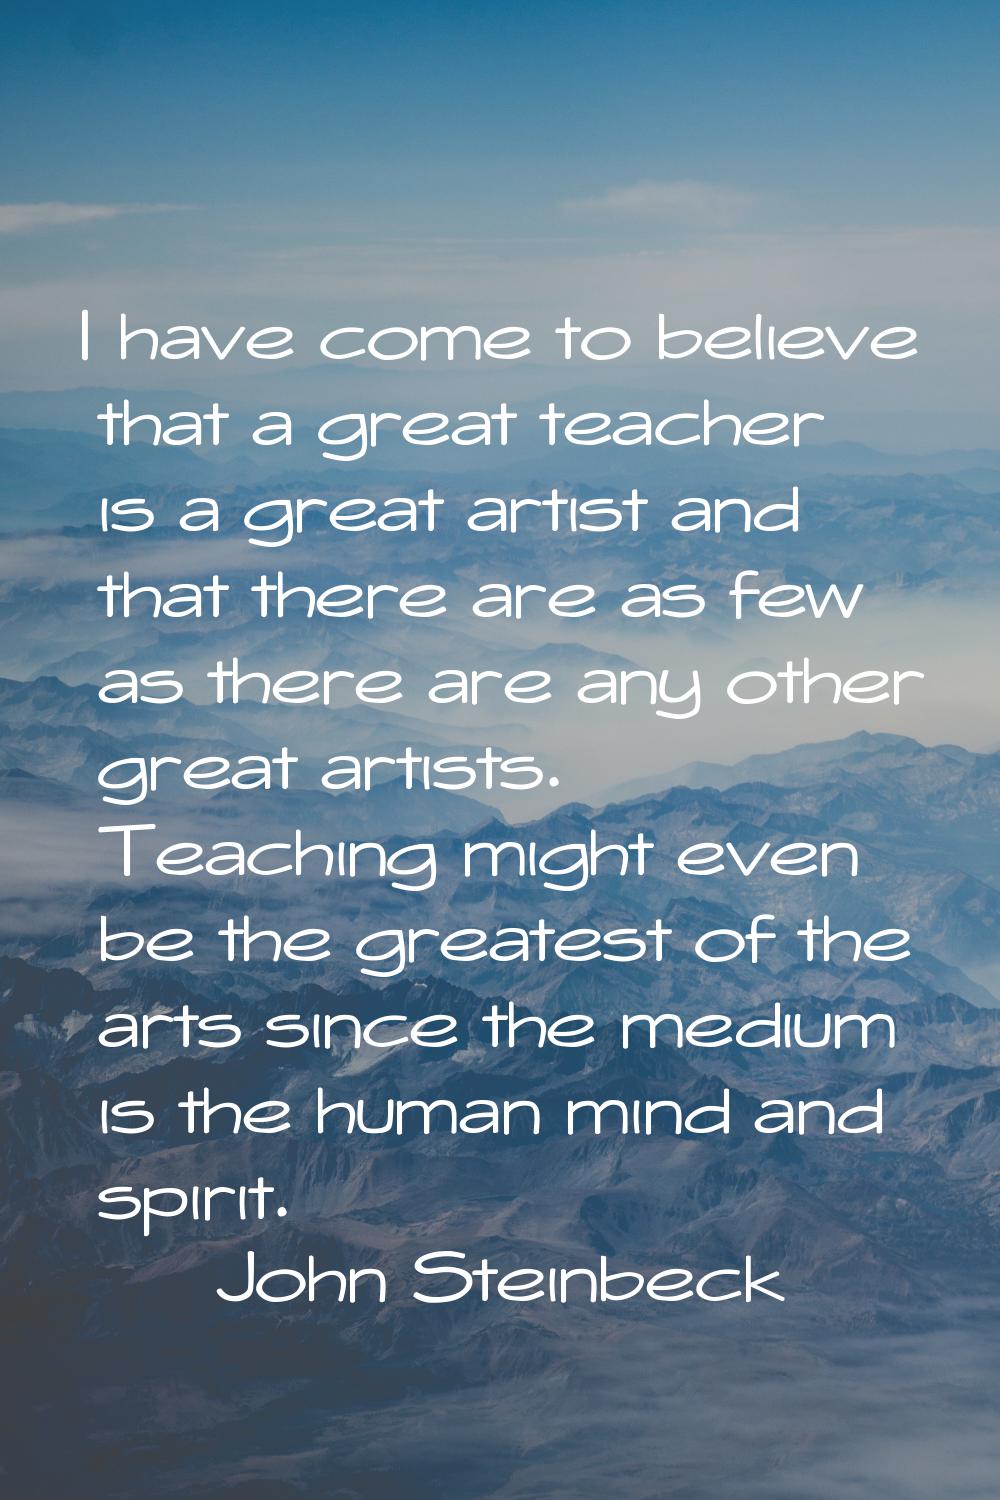 I have come to believe that a great teacher is a great artist and that there are as few as there ar